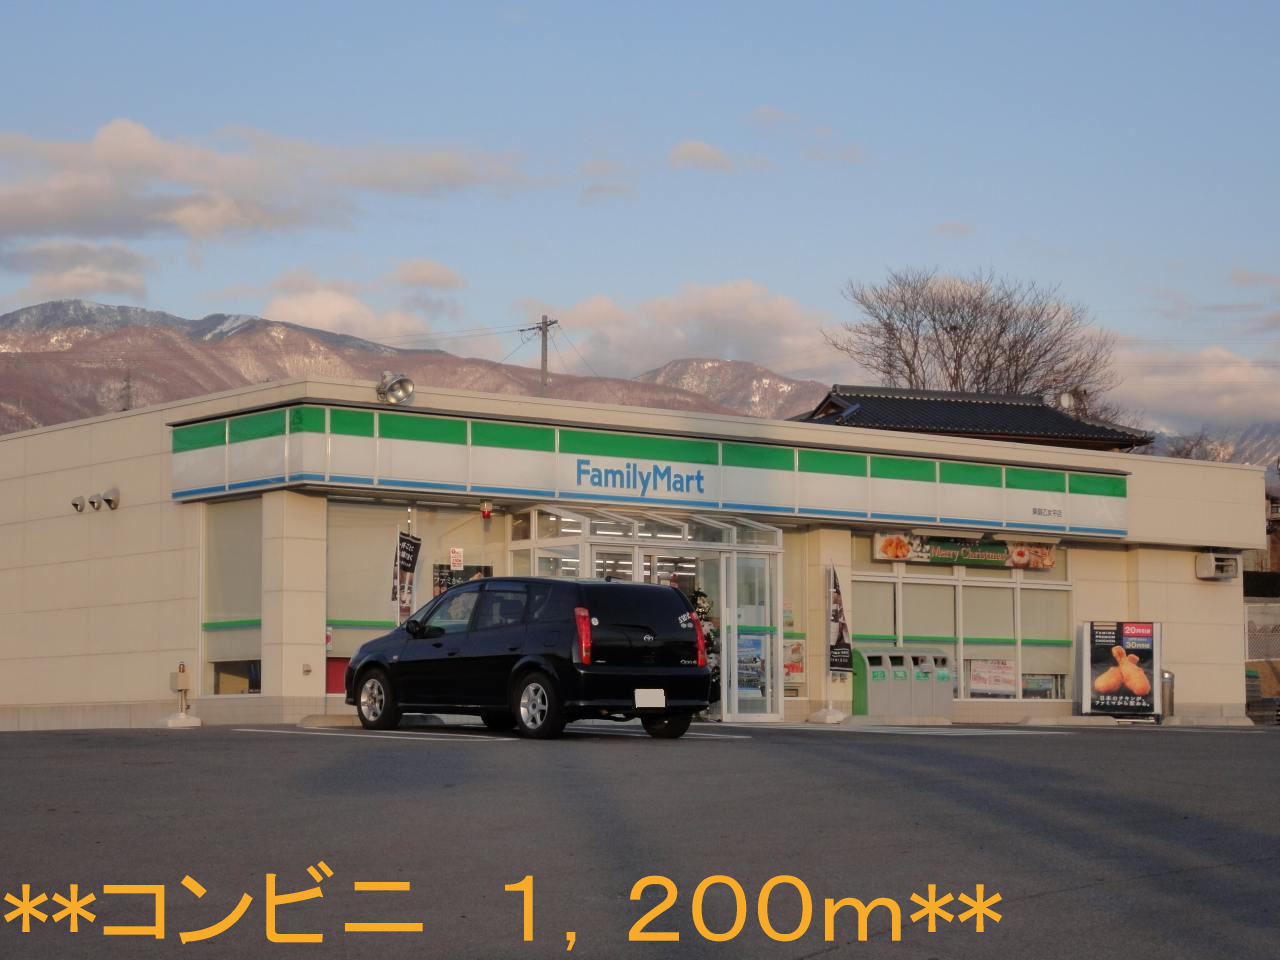 Convenience store. FamilyMart east your maiden Hiramise (convenience store) up to 1200m